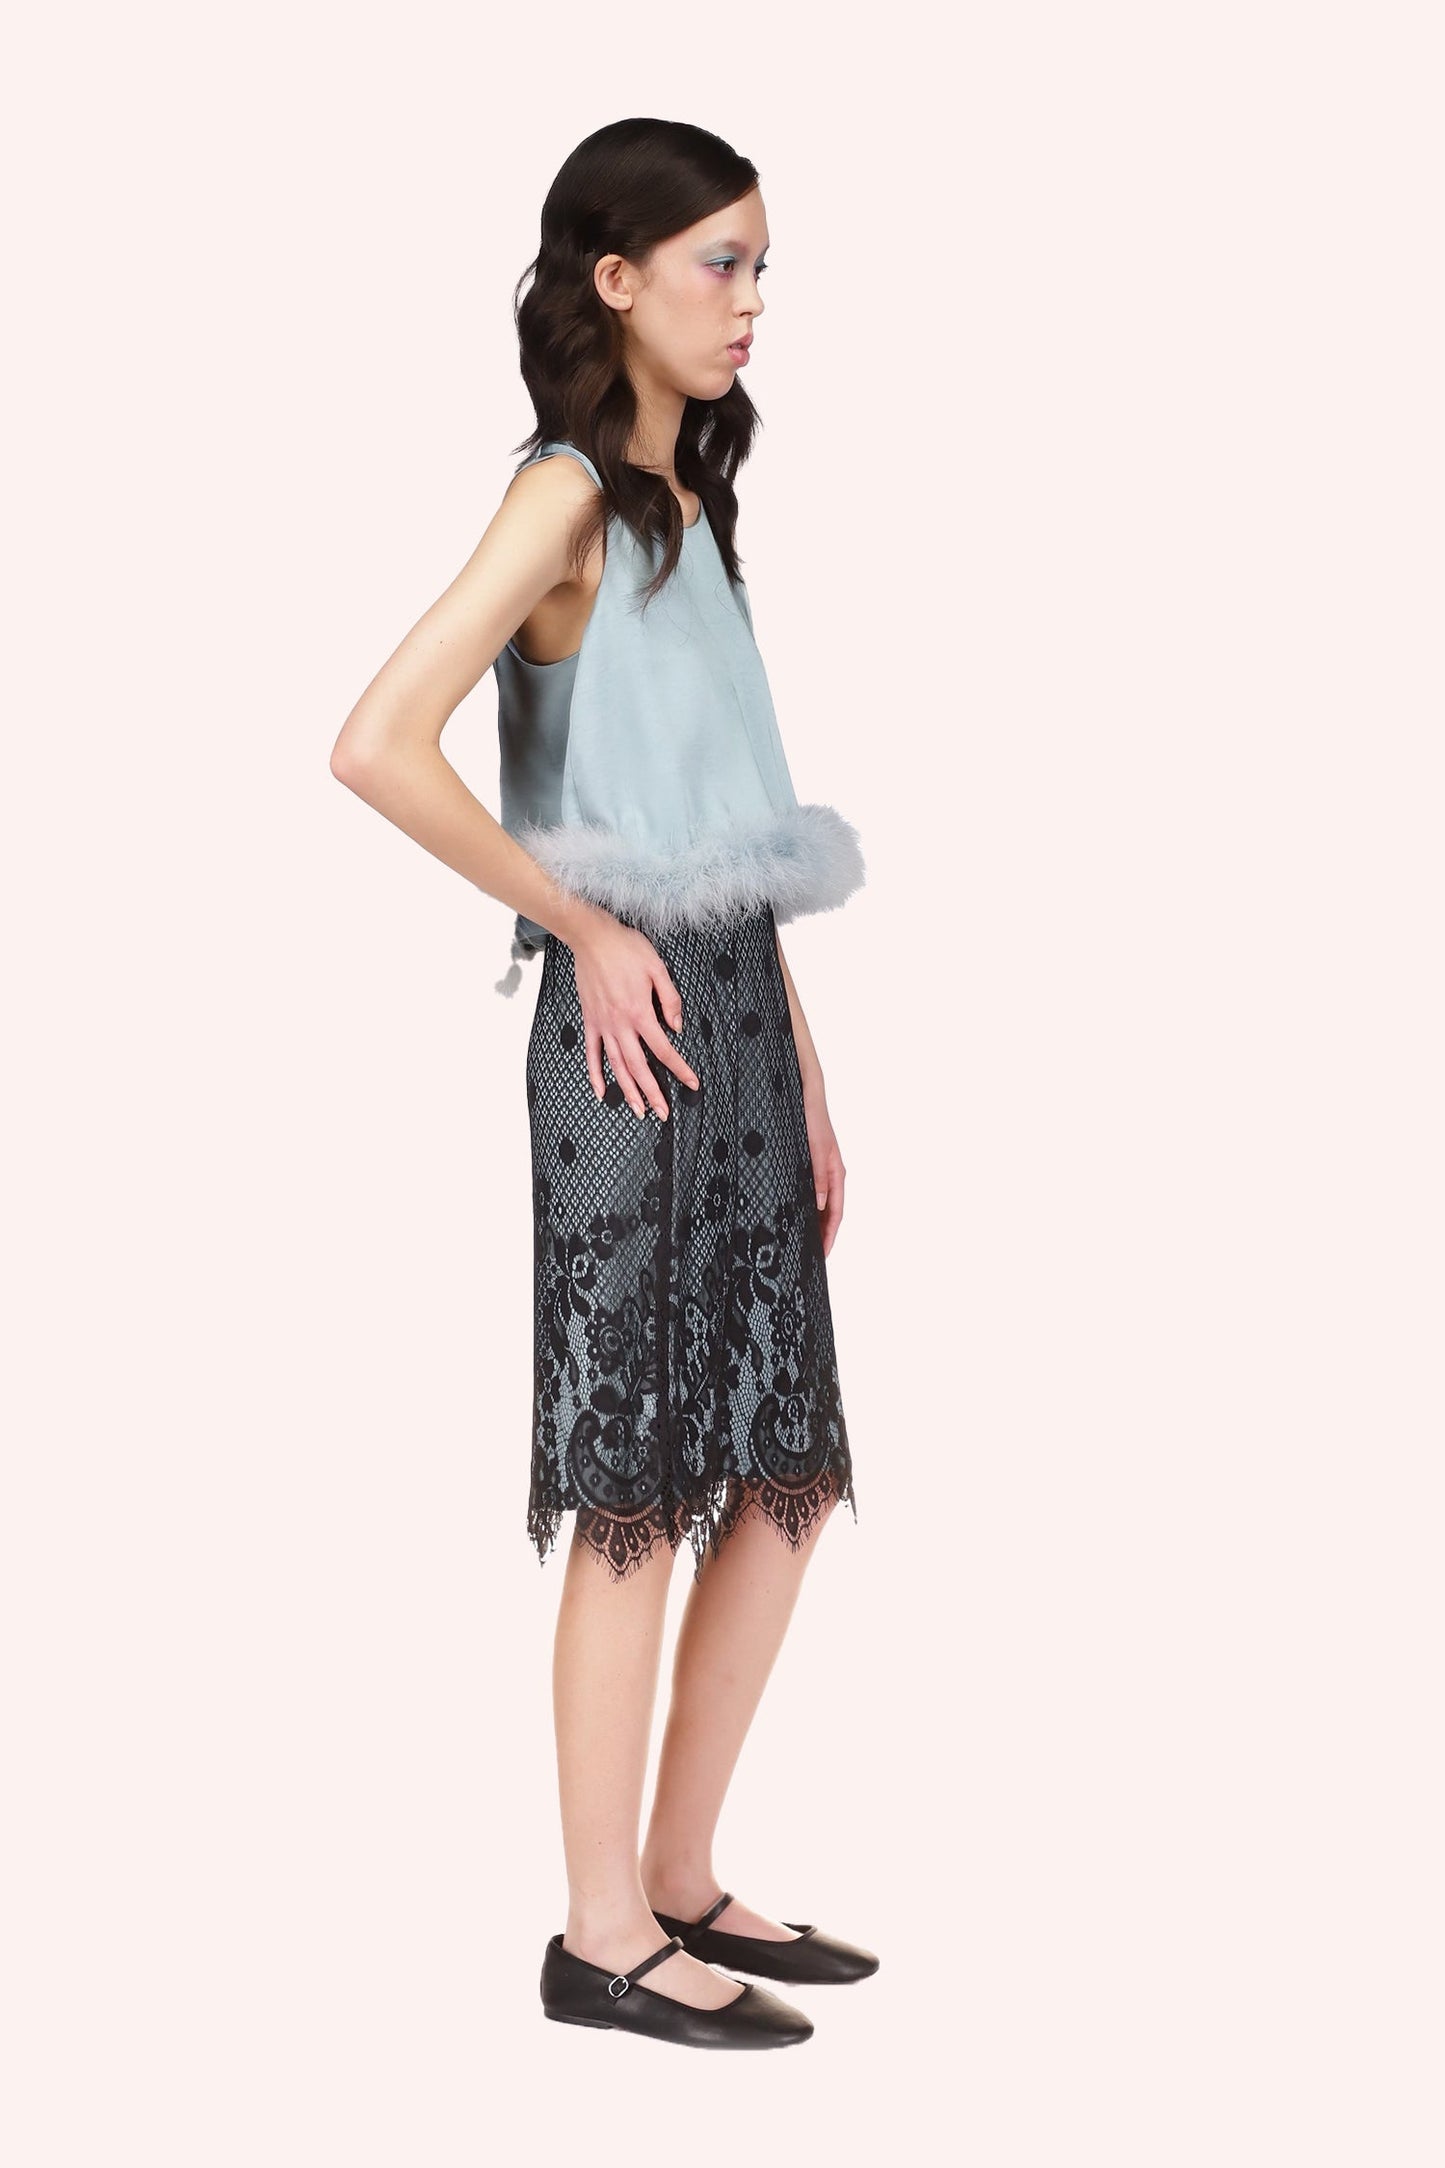 Washed Dusty Blue Satin with Lace Top Trimmed with Marabou Feather at waistline, sleeveless